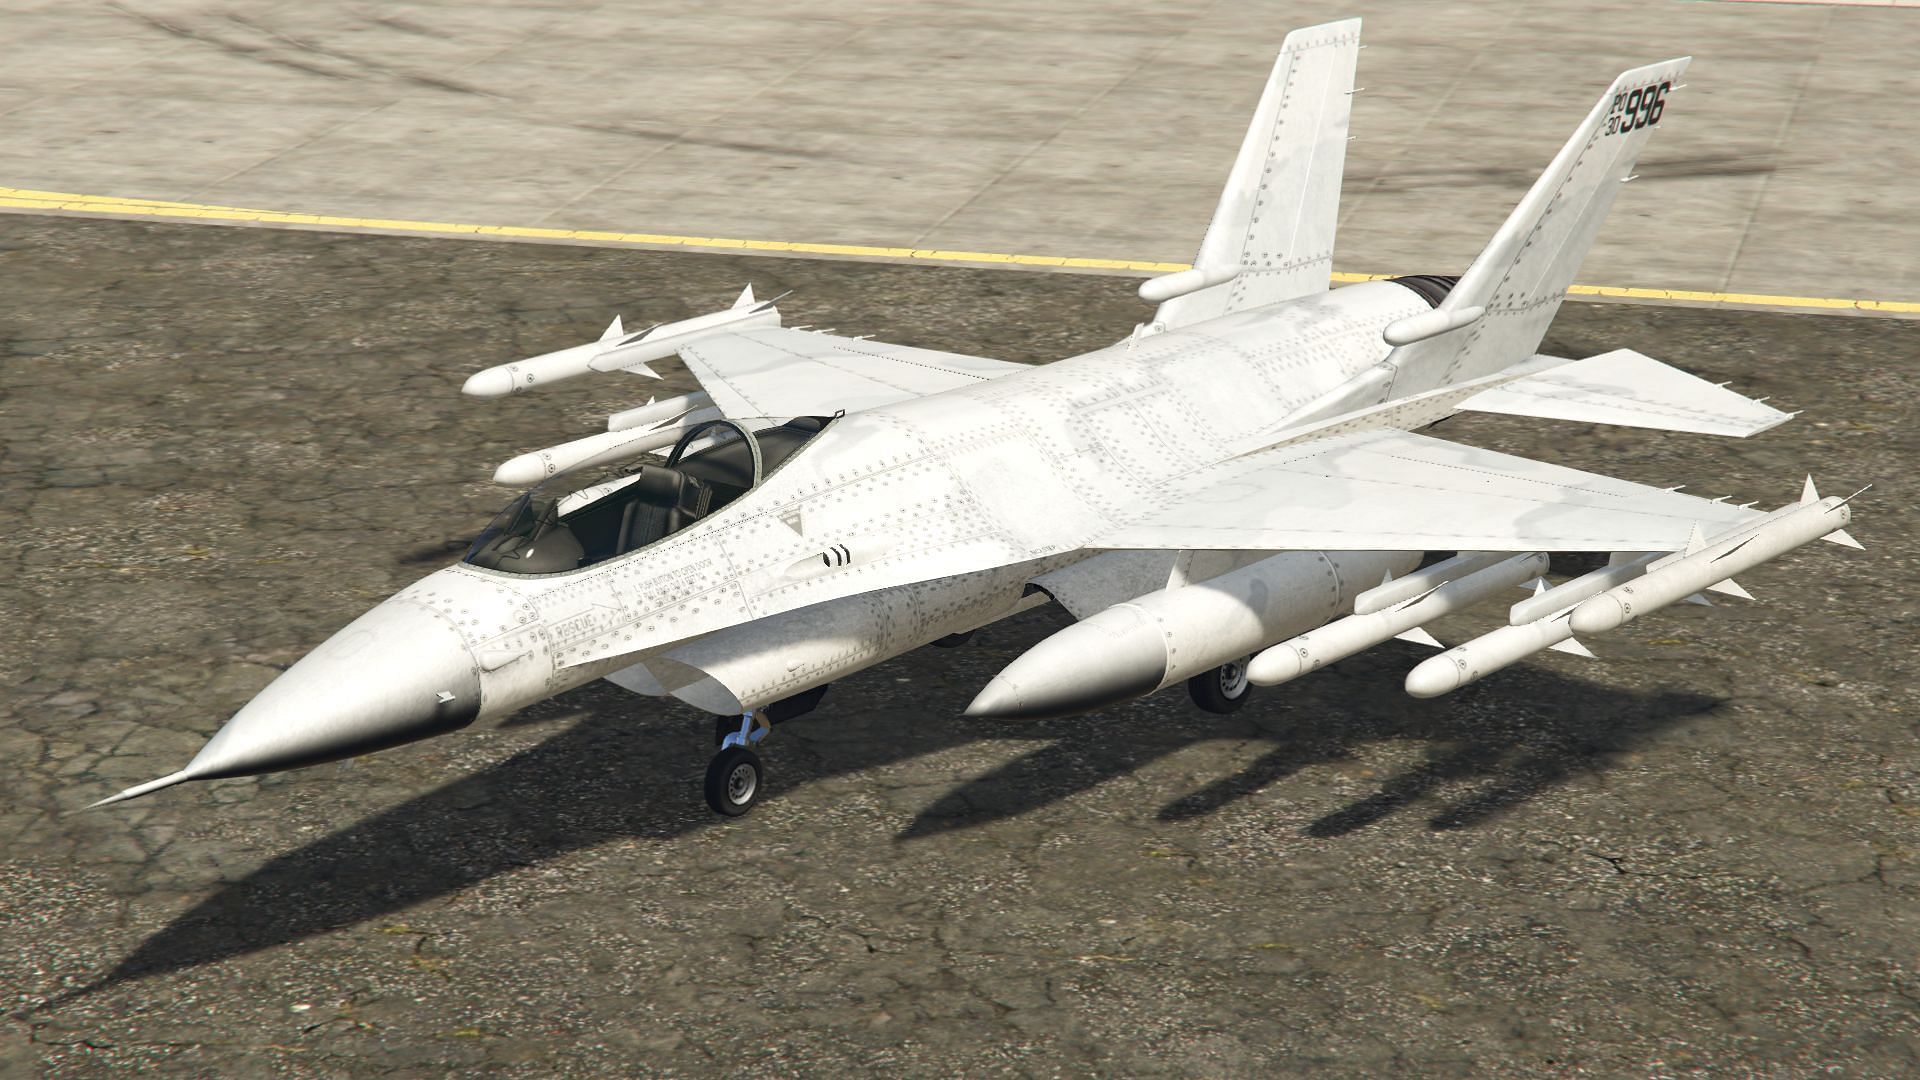 The P-996 Lazer is a solid choice to consider (Image via GTA Wiki)